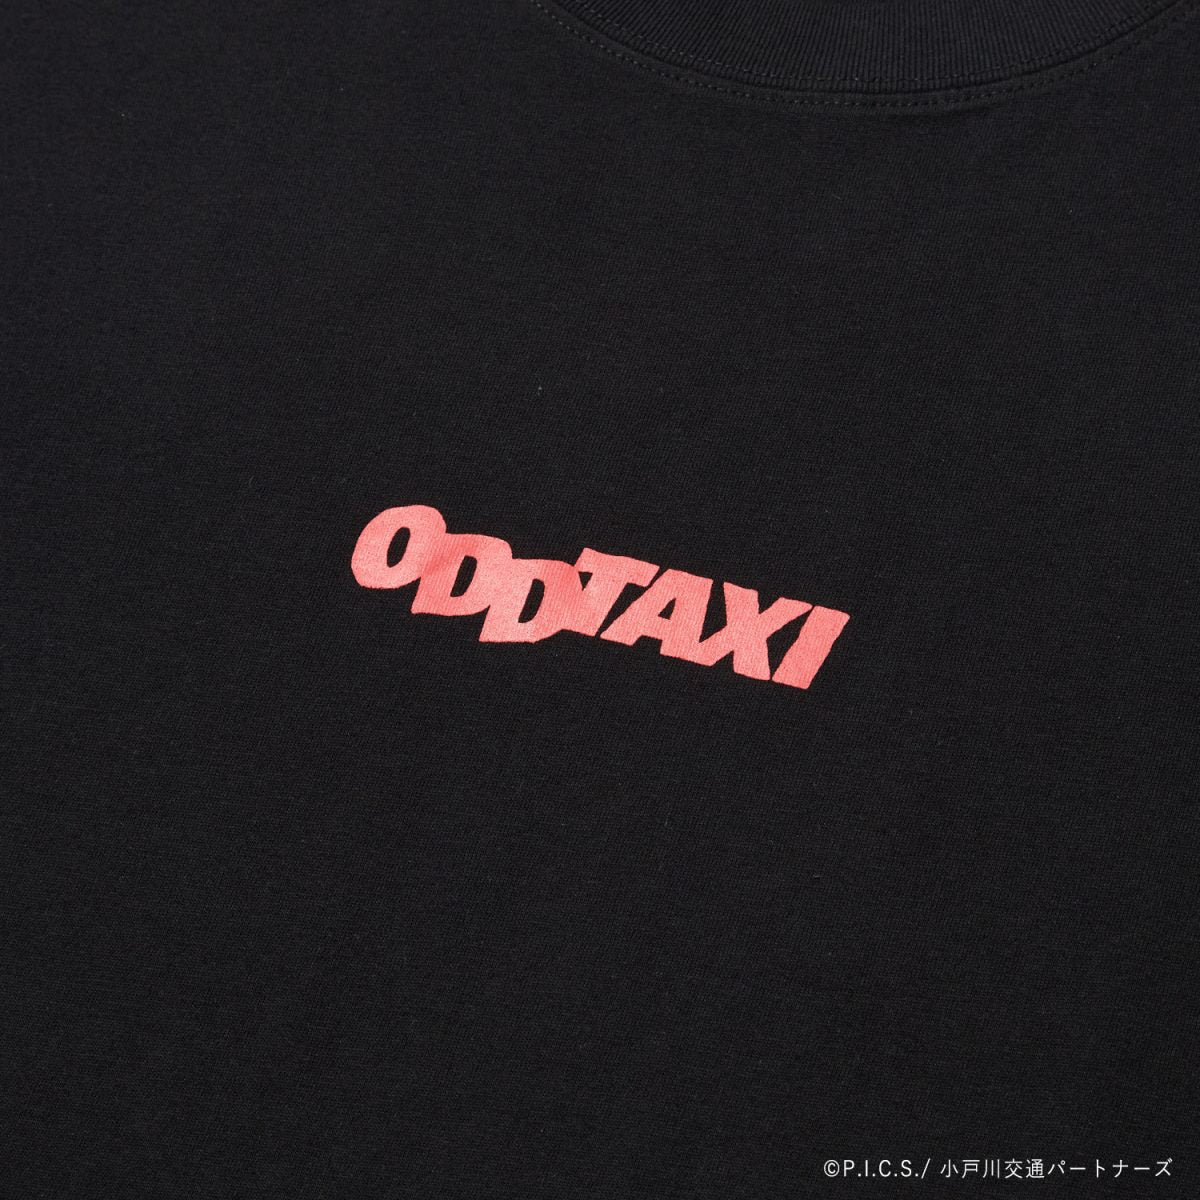 【ODDTAXI×DISCUSATHLETIC】バックプリントＴシャツ(全キャラクター)